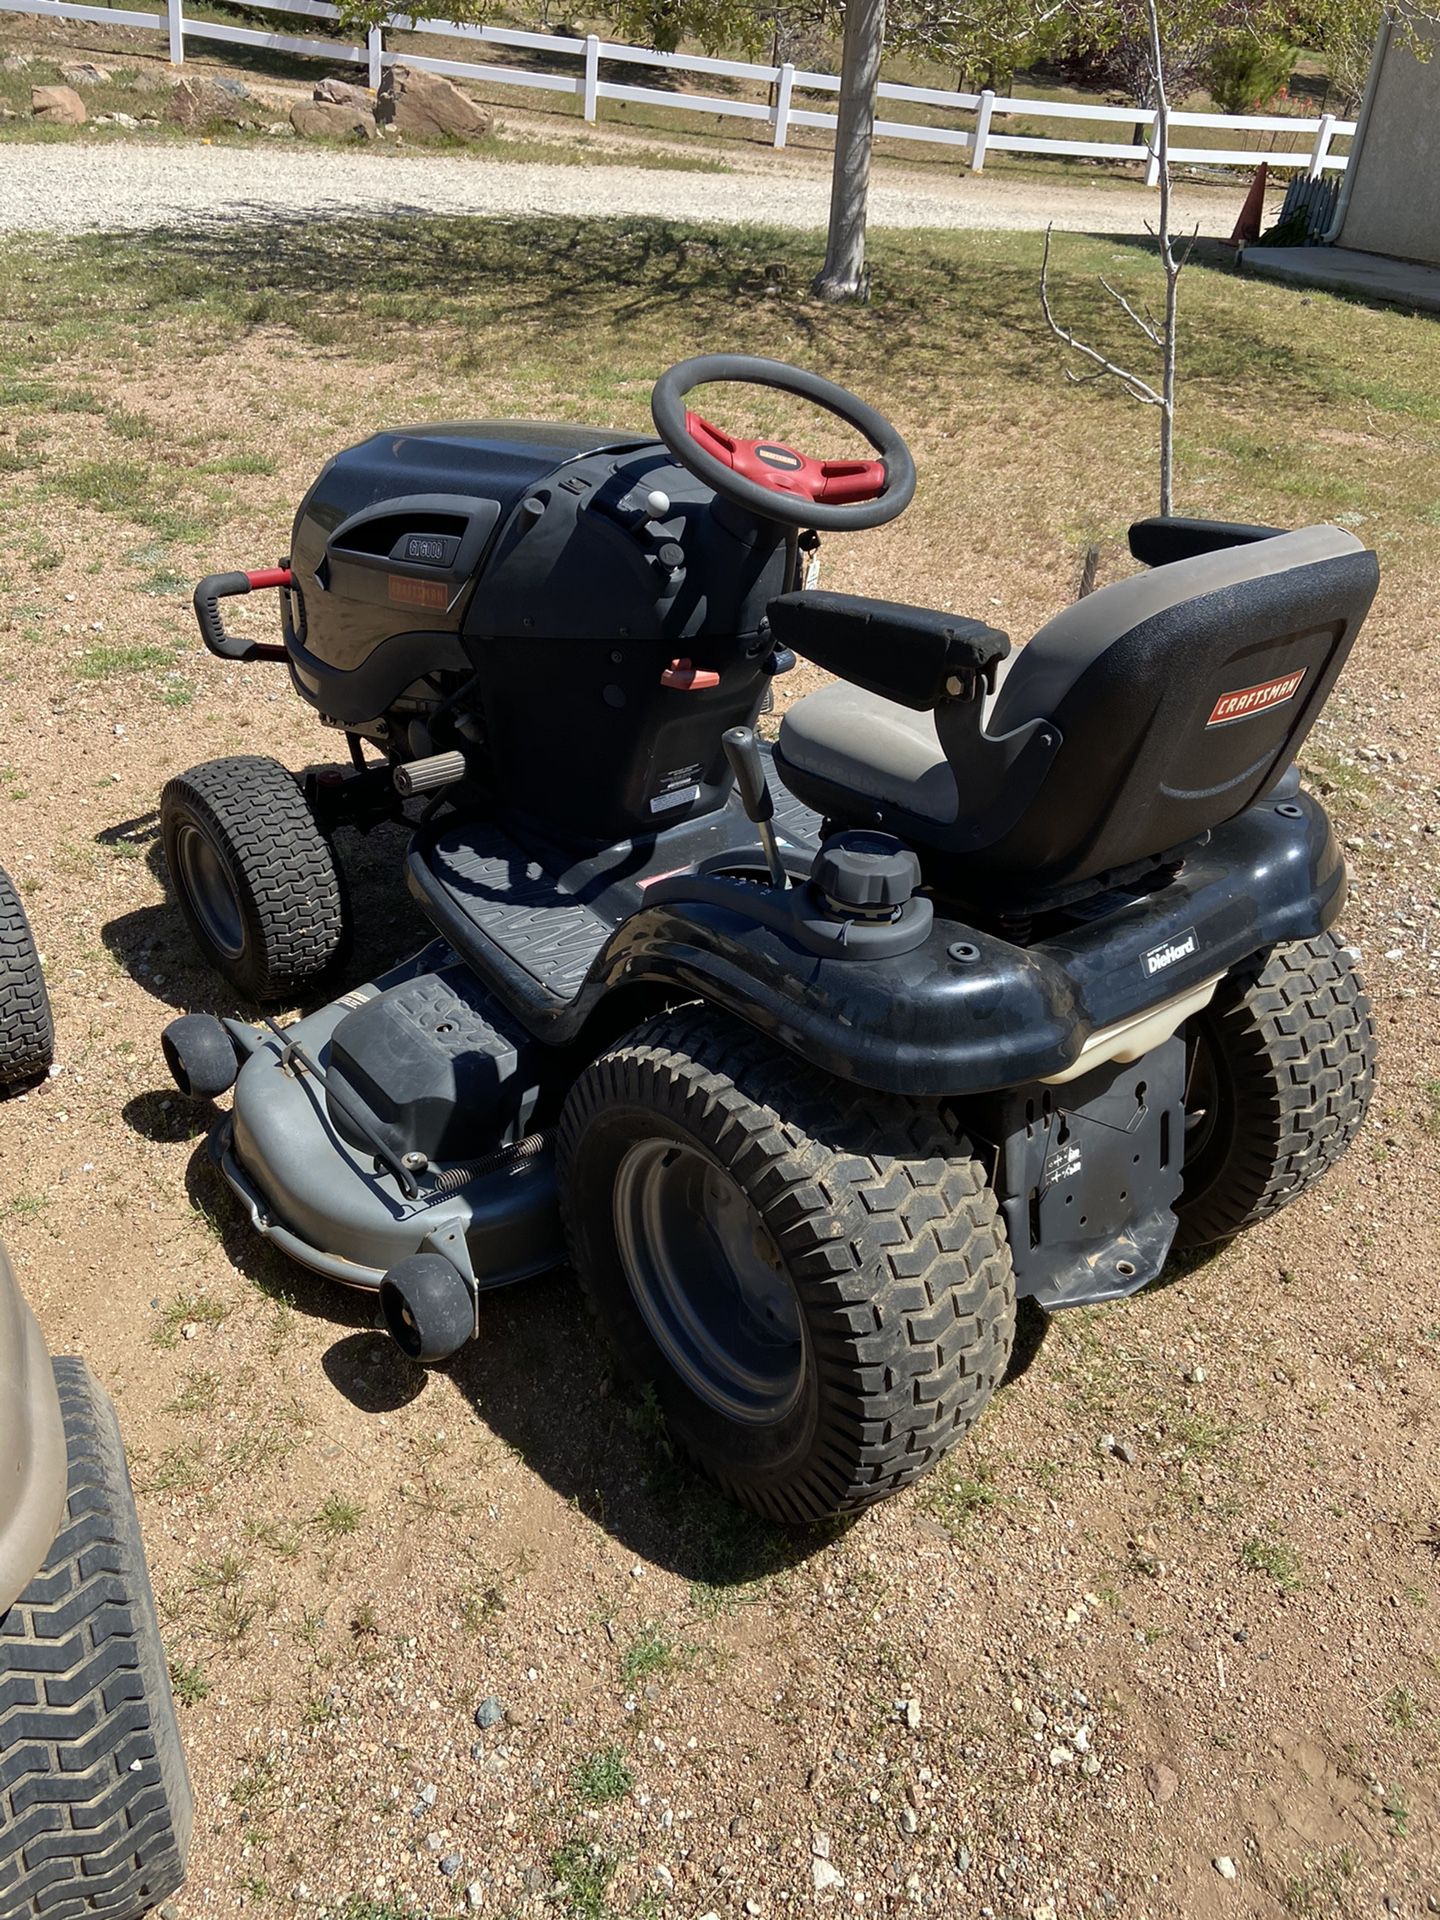 2001 and 2011 Sears Craftsman riding lawn mowers